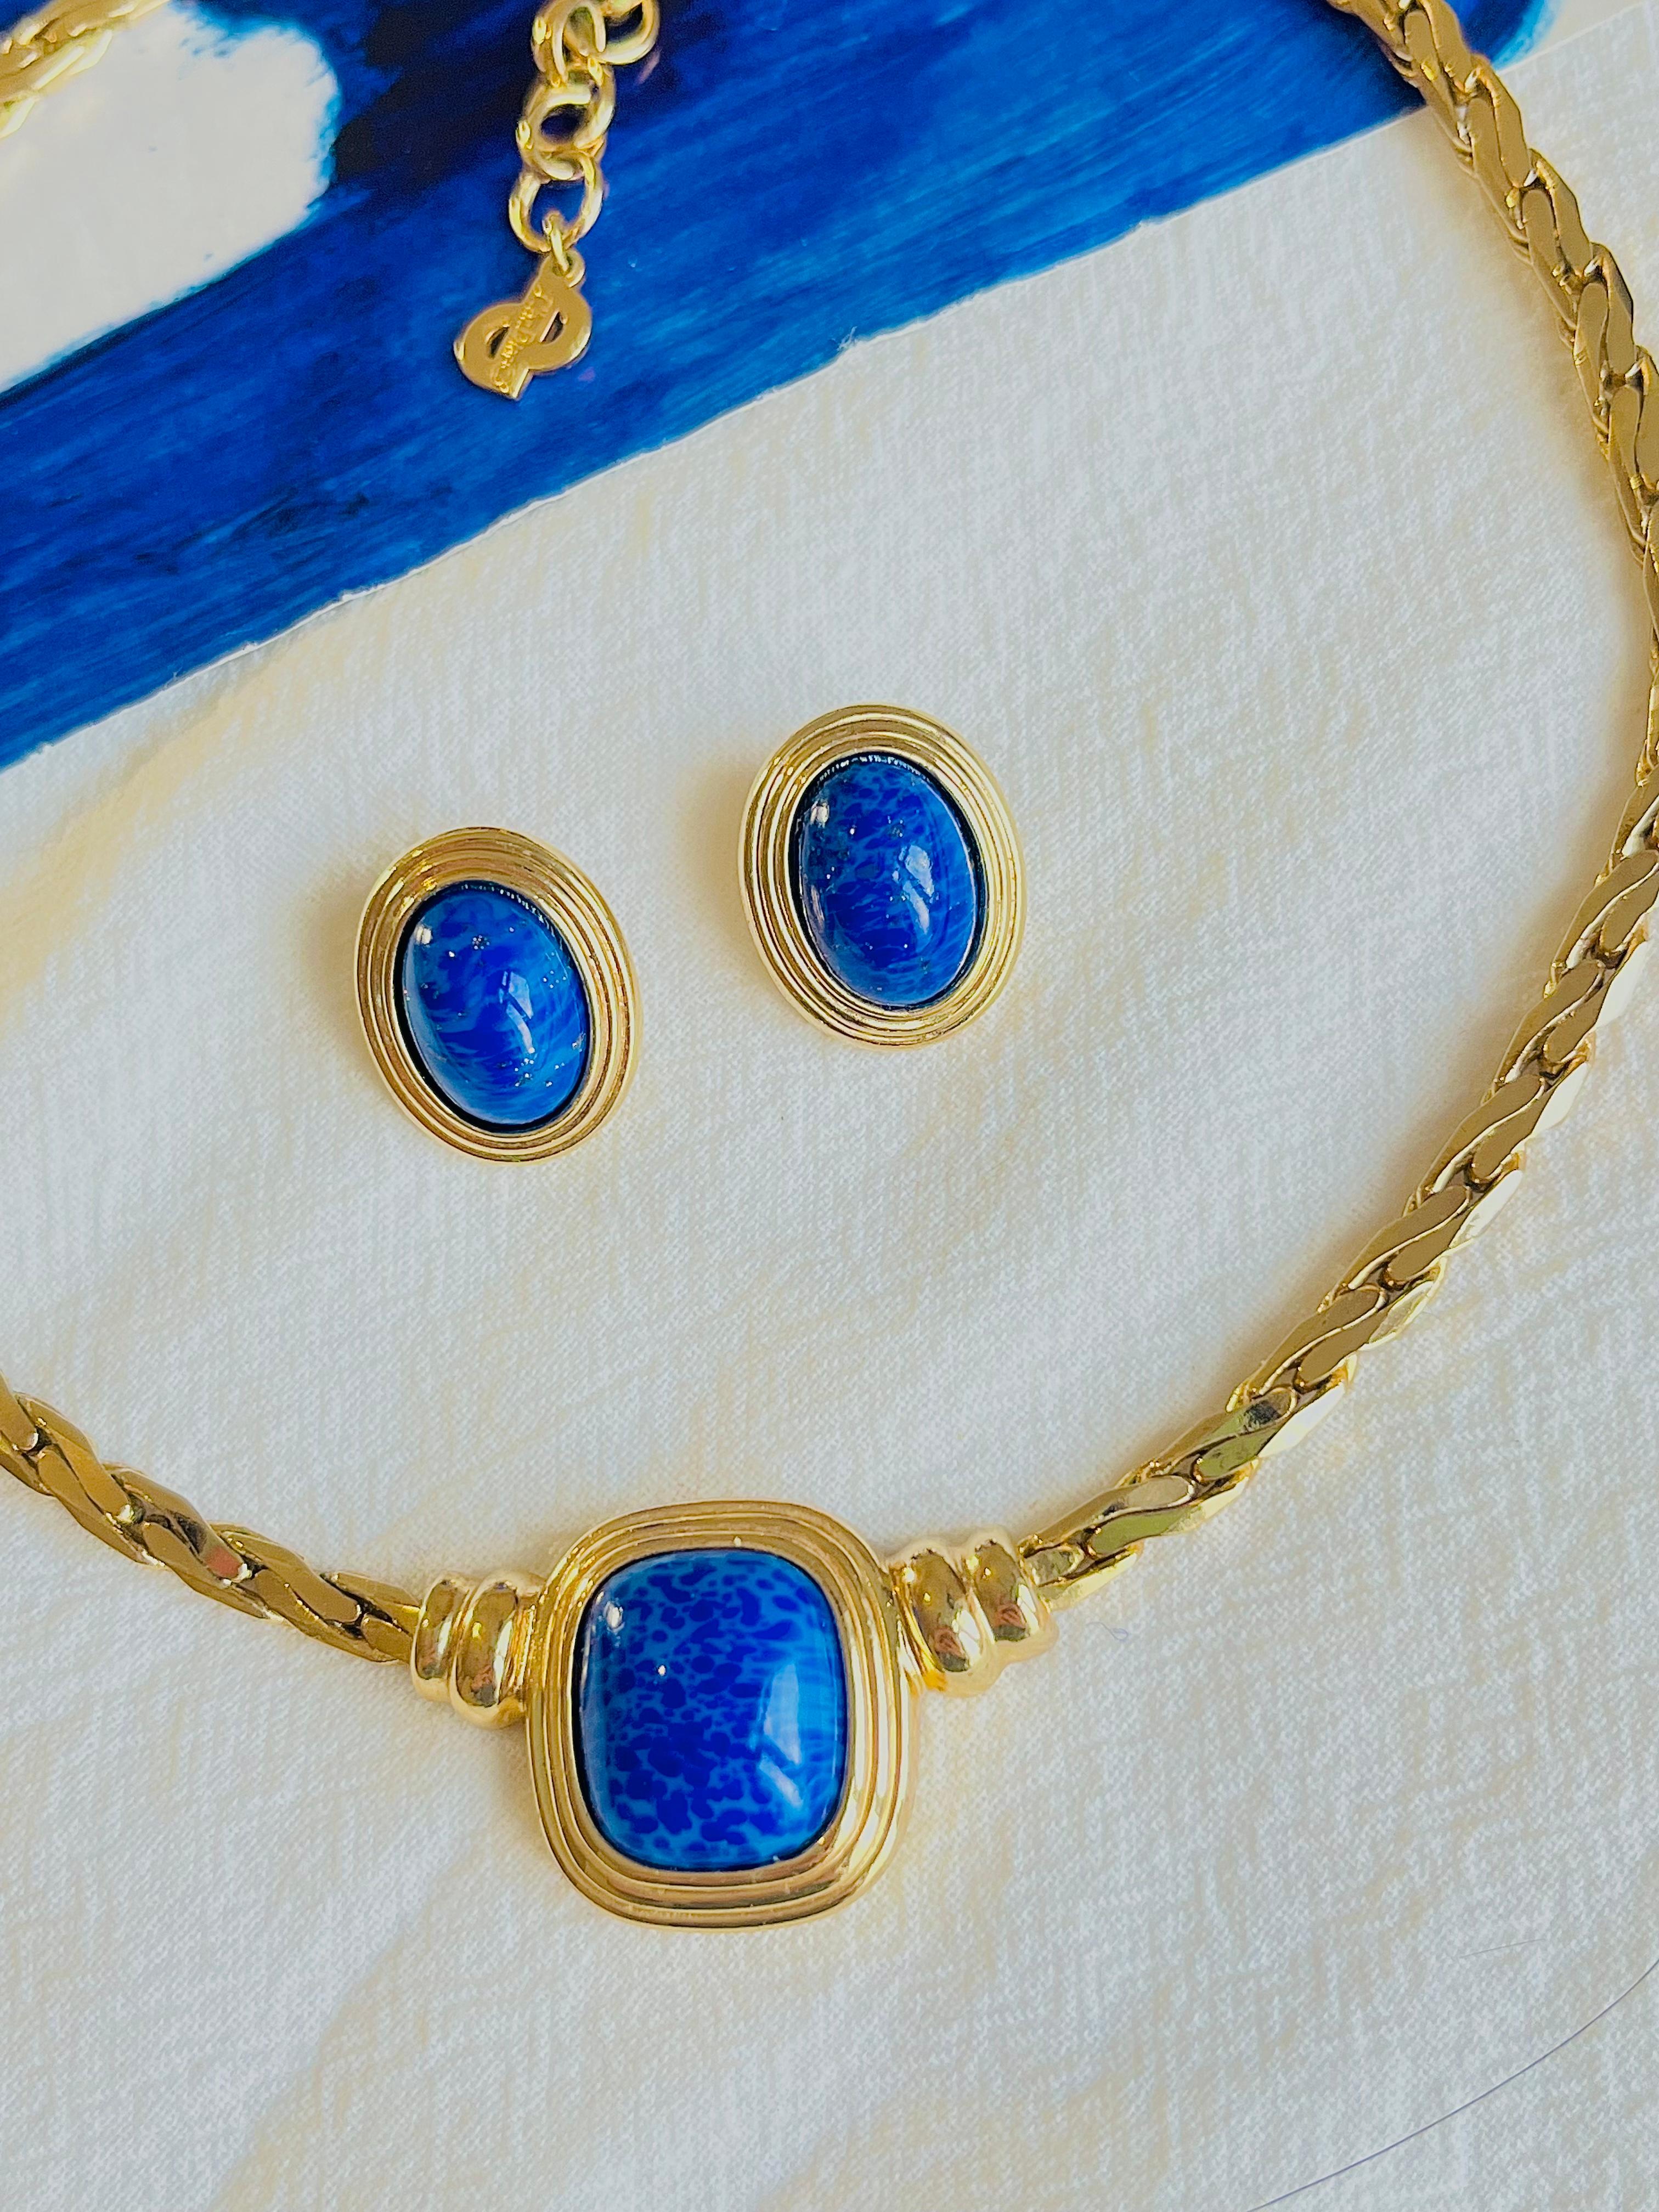 Christian Dior Vintage Lapis Navy Rectangle Oval Cabochon Jewellery Set Necklace Earrings, Gold Tone

Very good condition. 100% Genuine. Vintage and rare to find. Come with original pouch and box.

Signed 